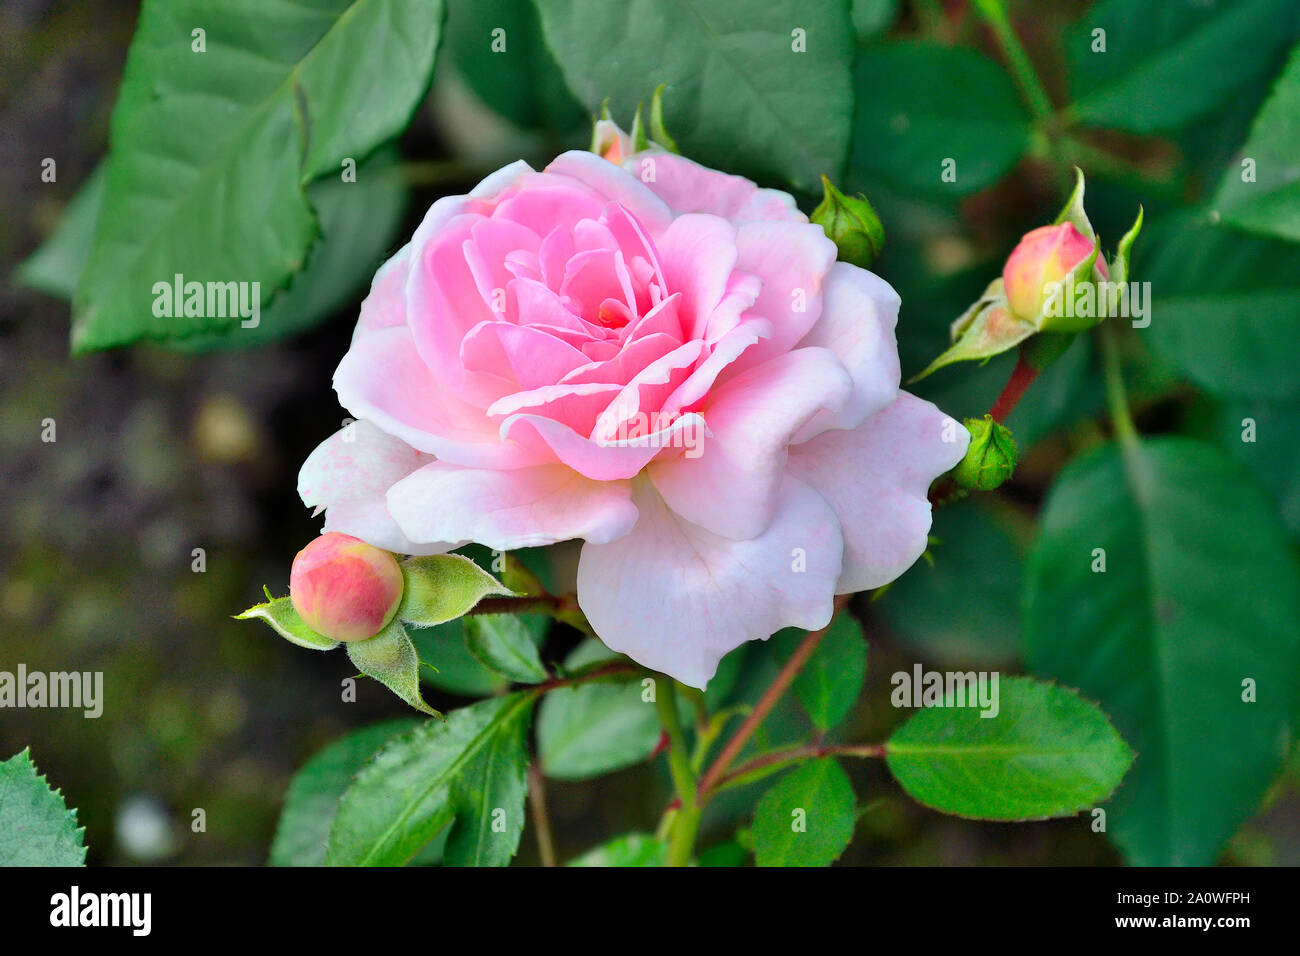 Single gentle pink rose with buds in the garden close up on blurred green leaves natural background. Beautiful fresh tender pink flower from roses gar Stock Photo